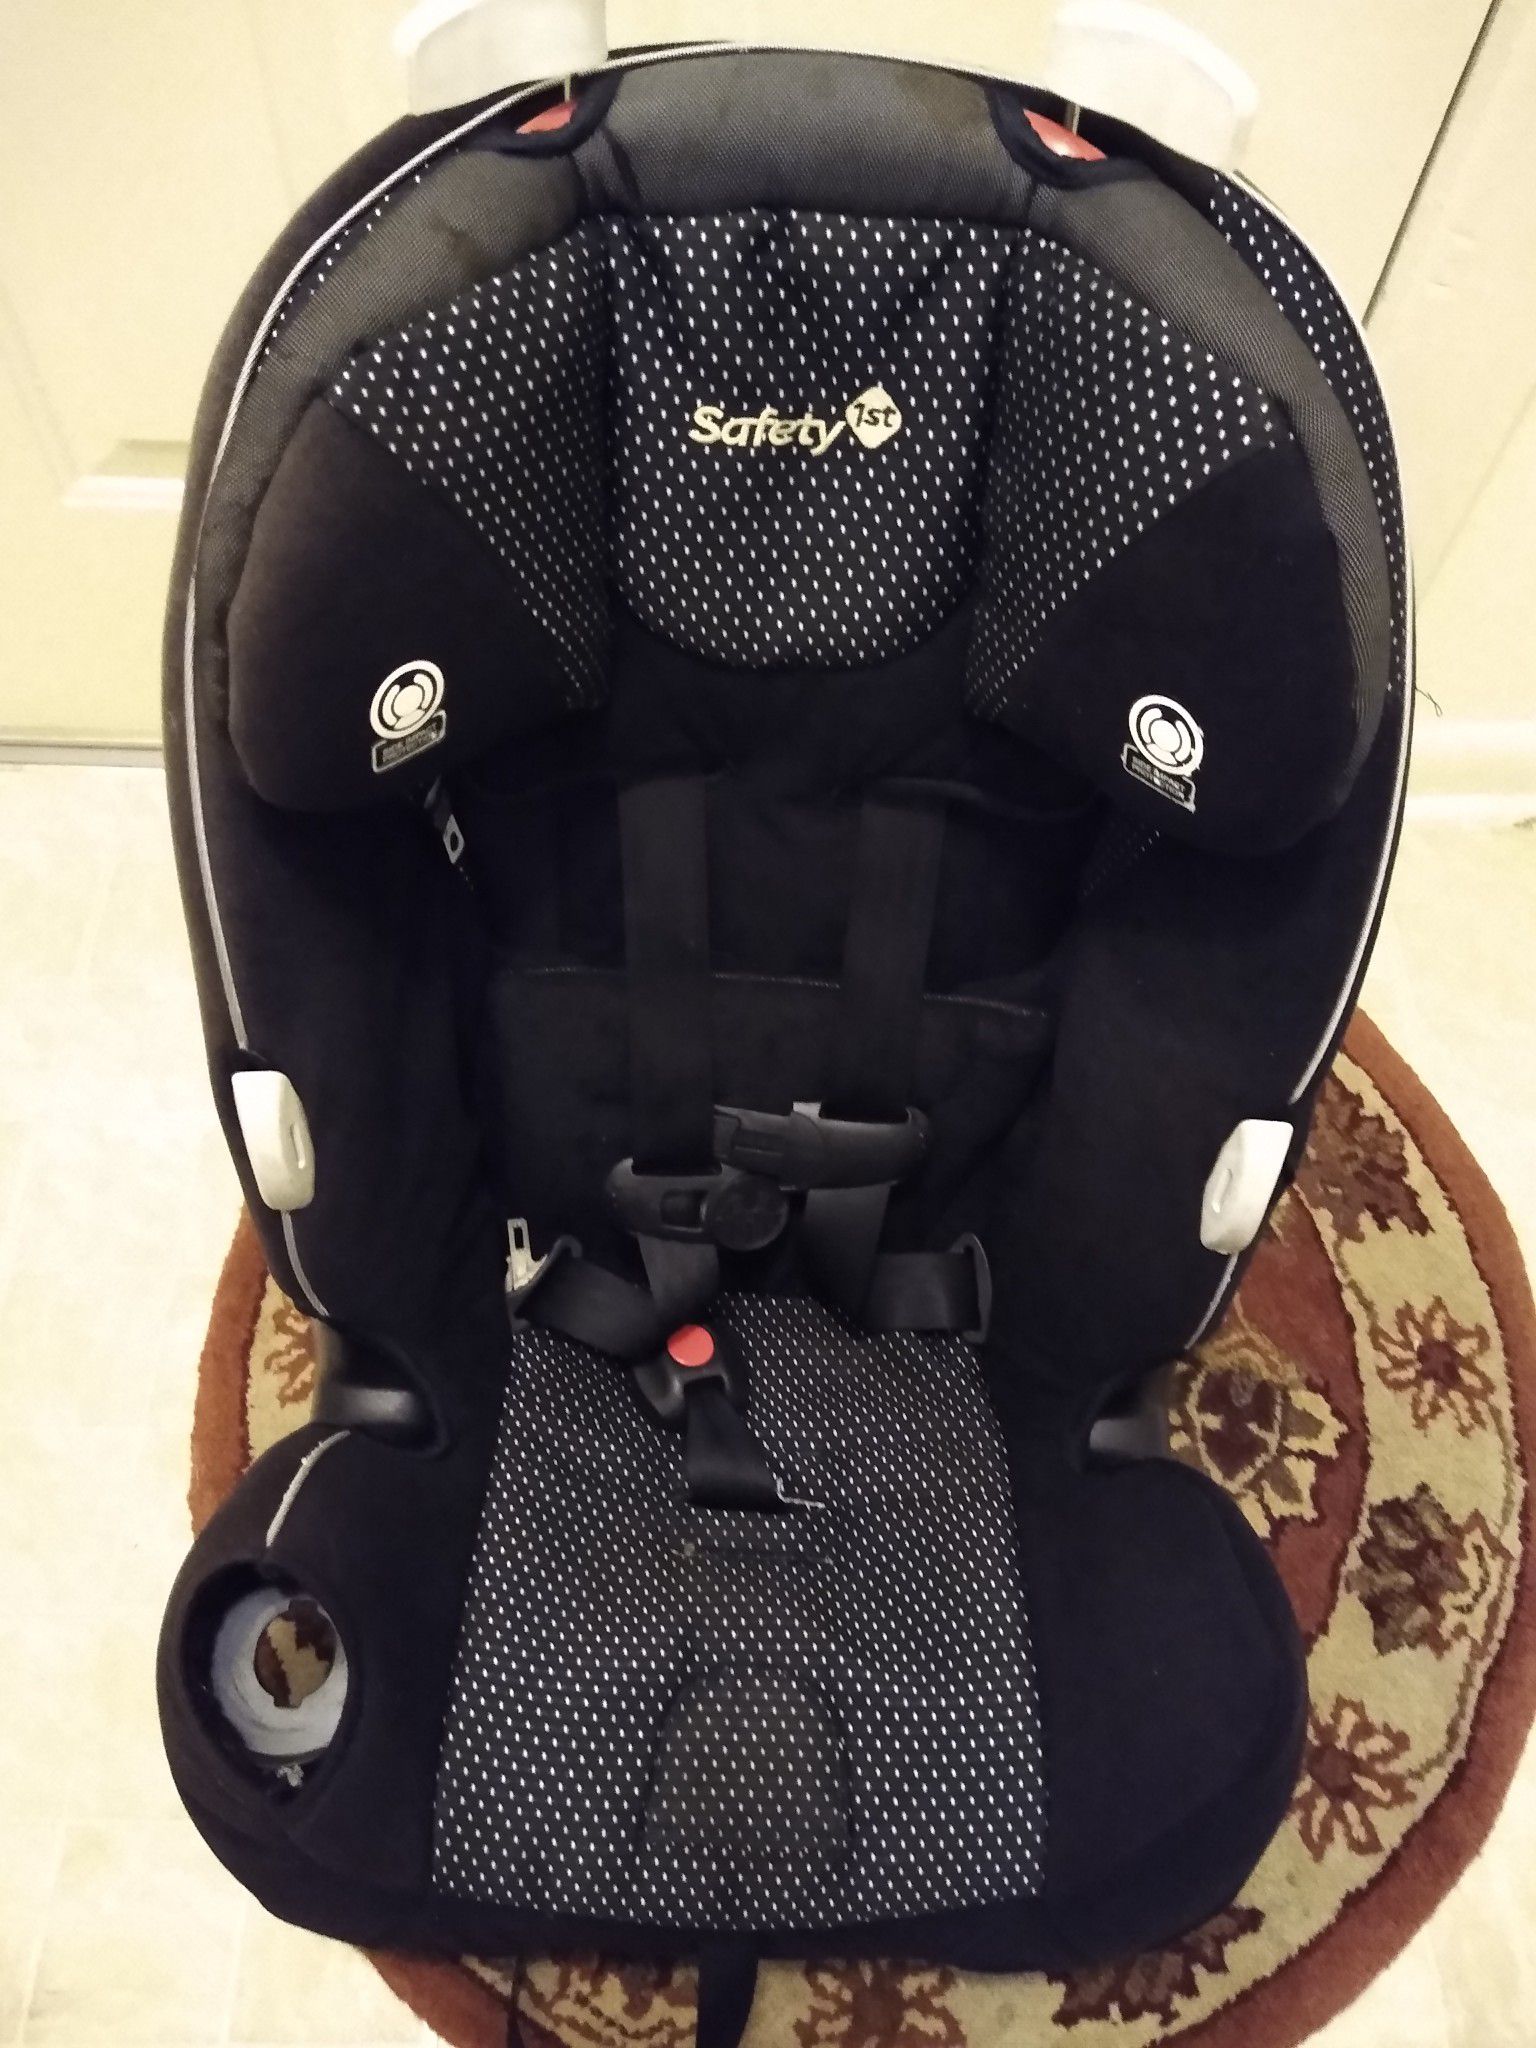 Used car seat one has missing cup are offer